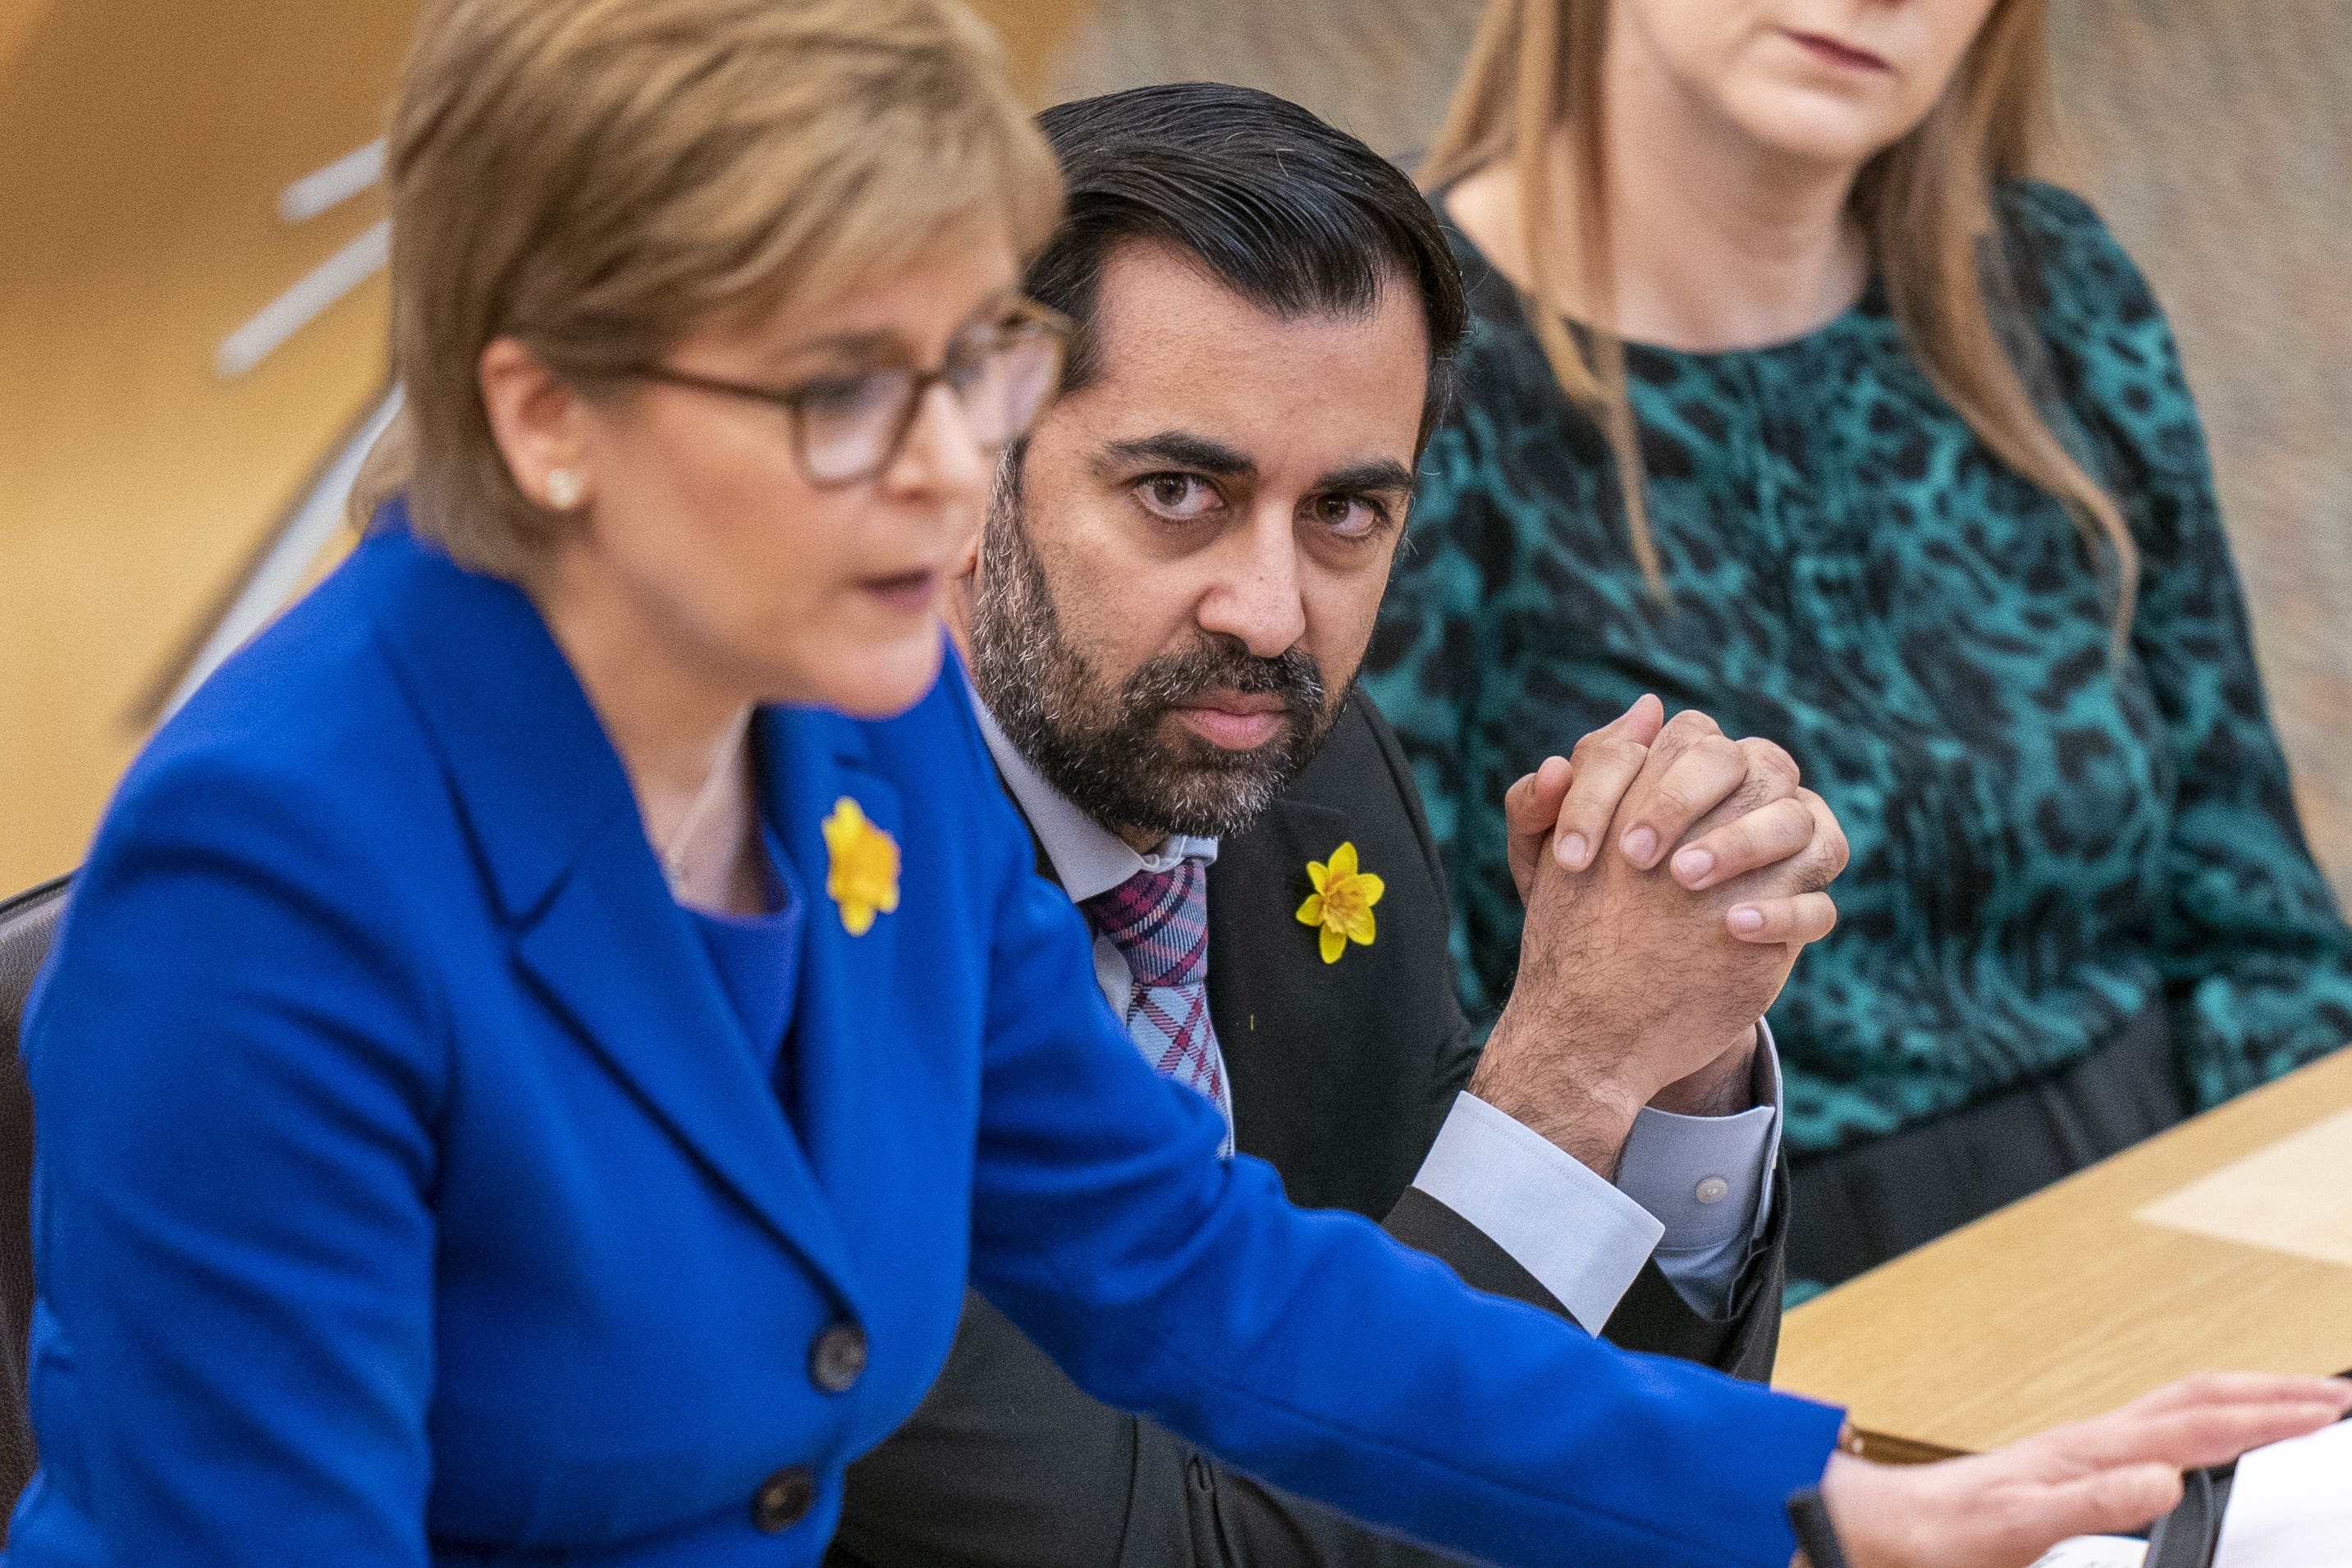 Humza Yousaf says he hopes to rely on the guidance of Nicola Sturgeon